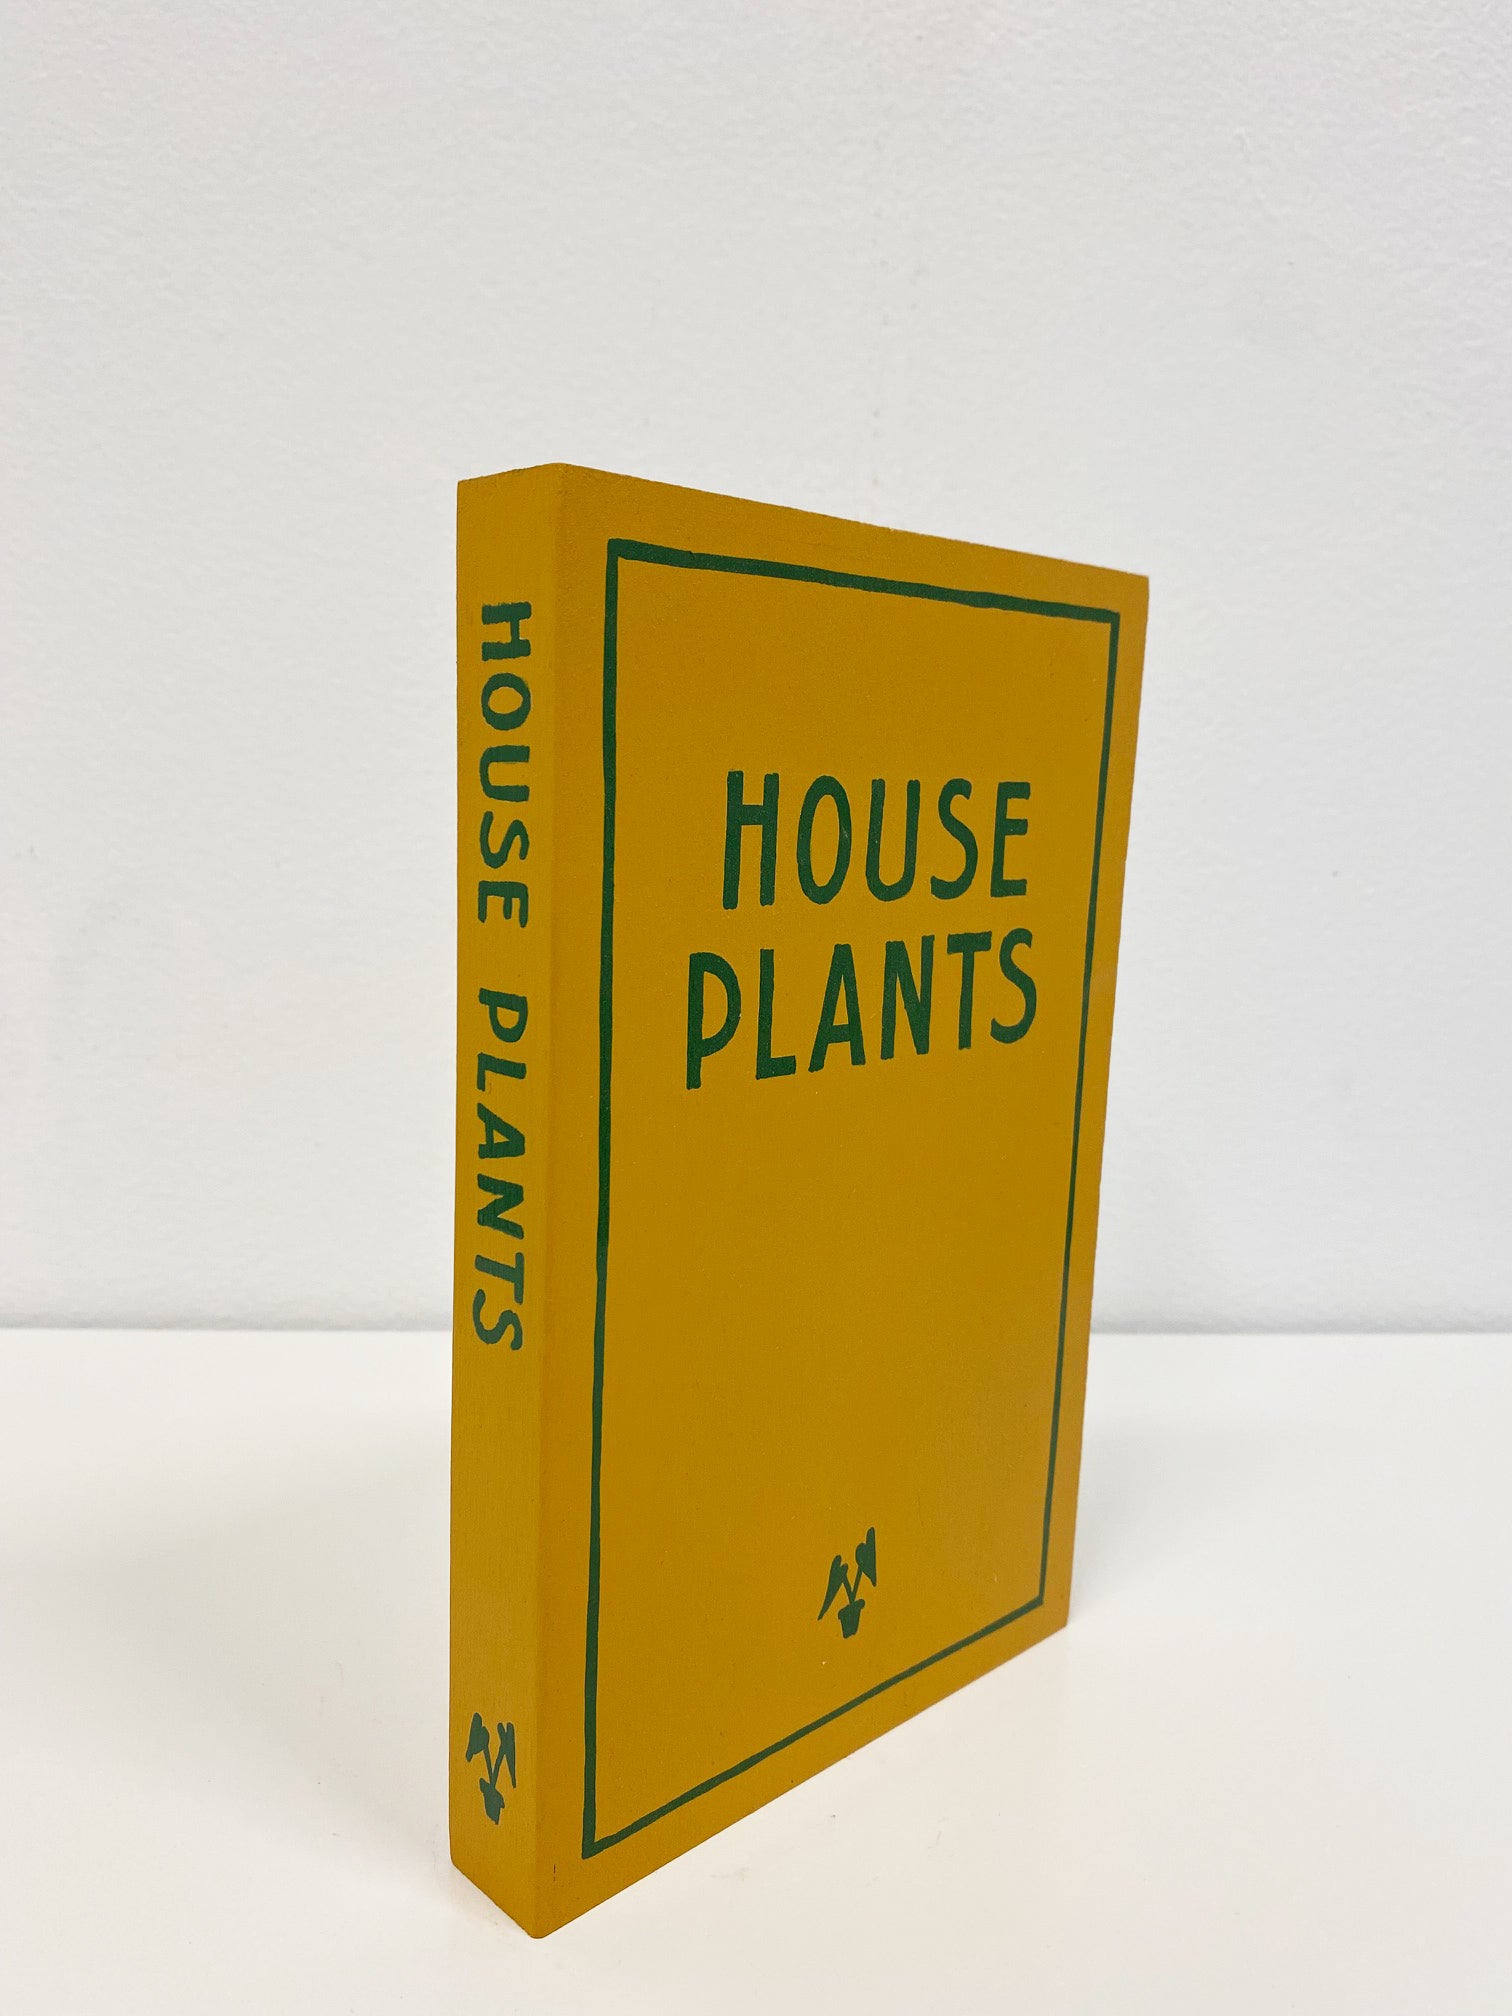 Wooden sculpture of a yellow book with the works House Plants painted on the front and on the spine of the book in dark green